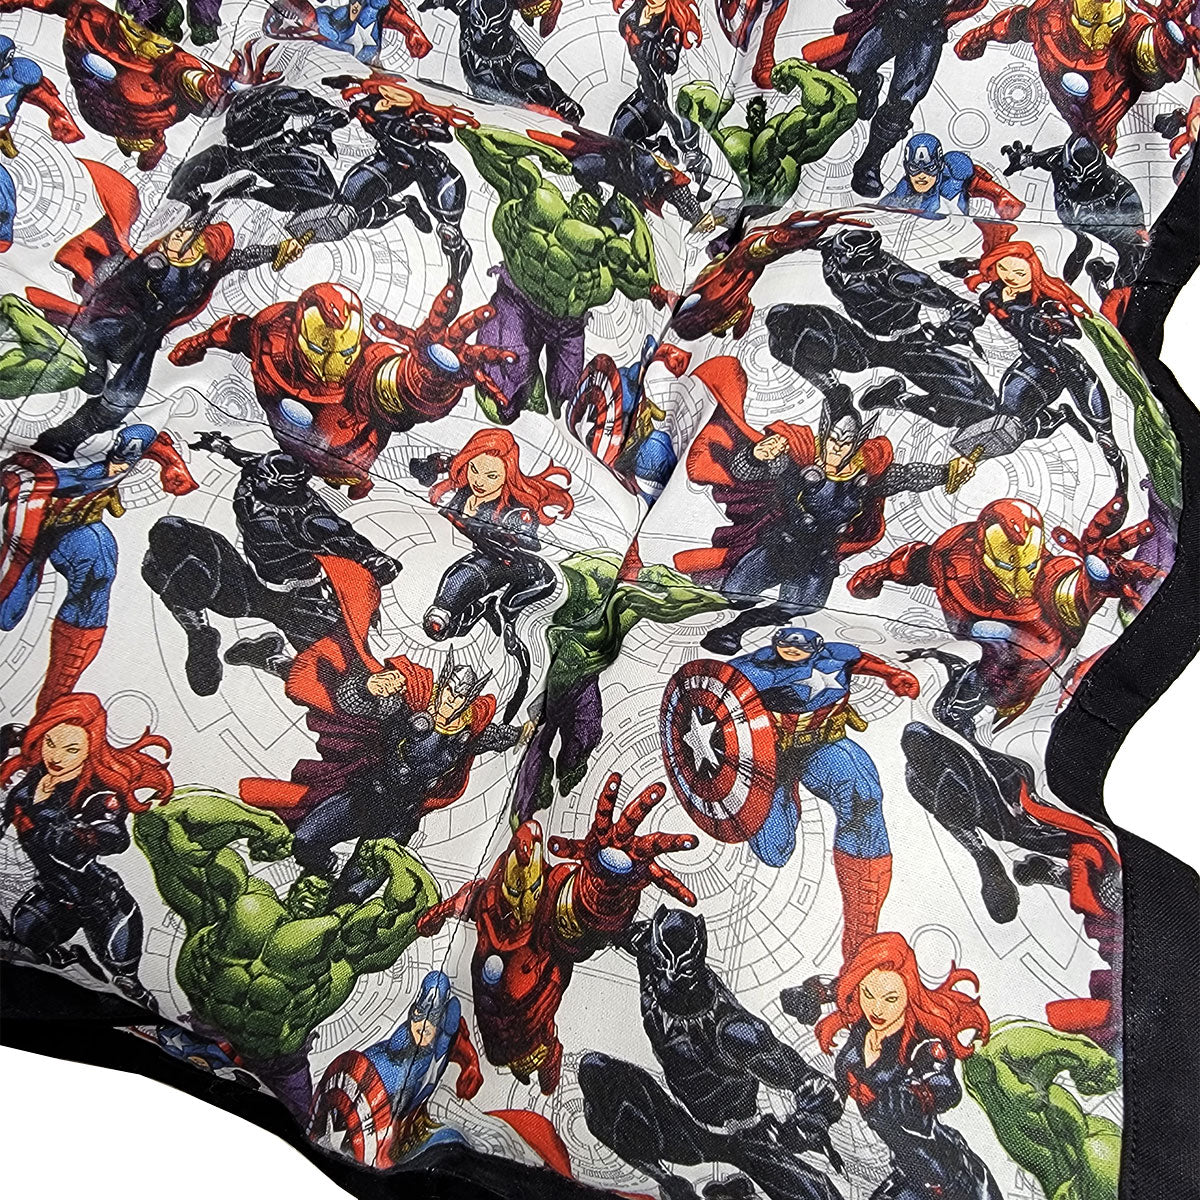 Clearance Weighted Blanket - Medium 9 lb Avengers (for 70 lb user)